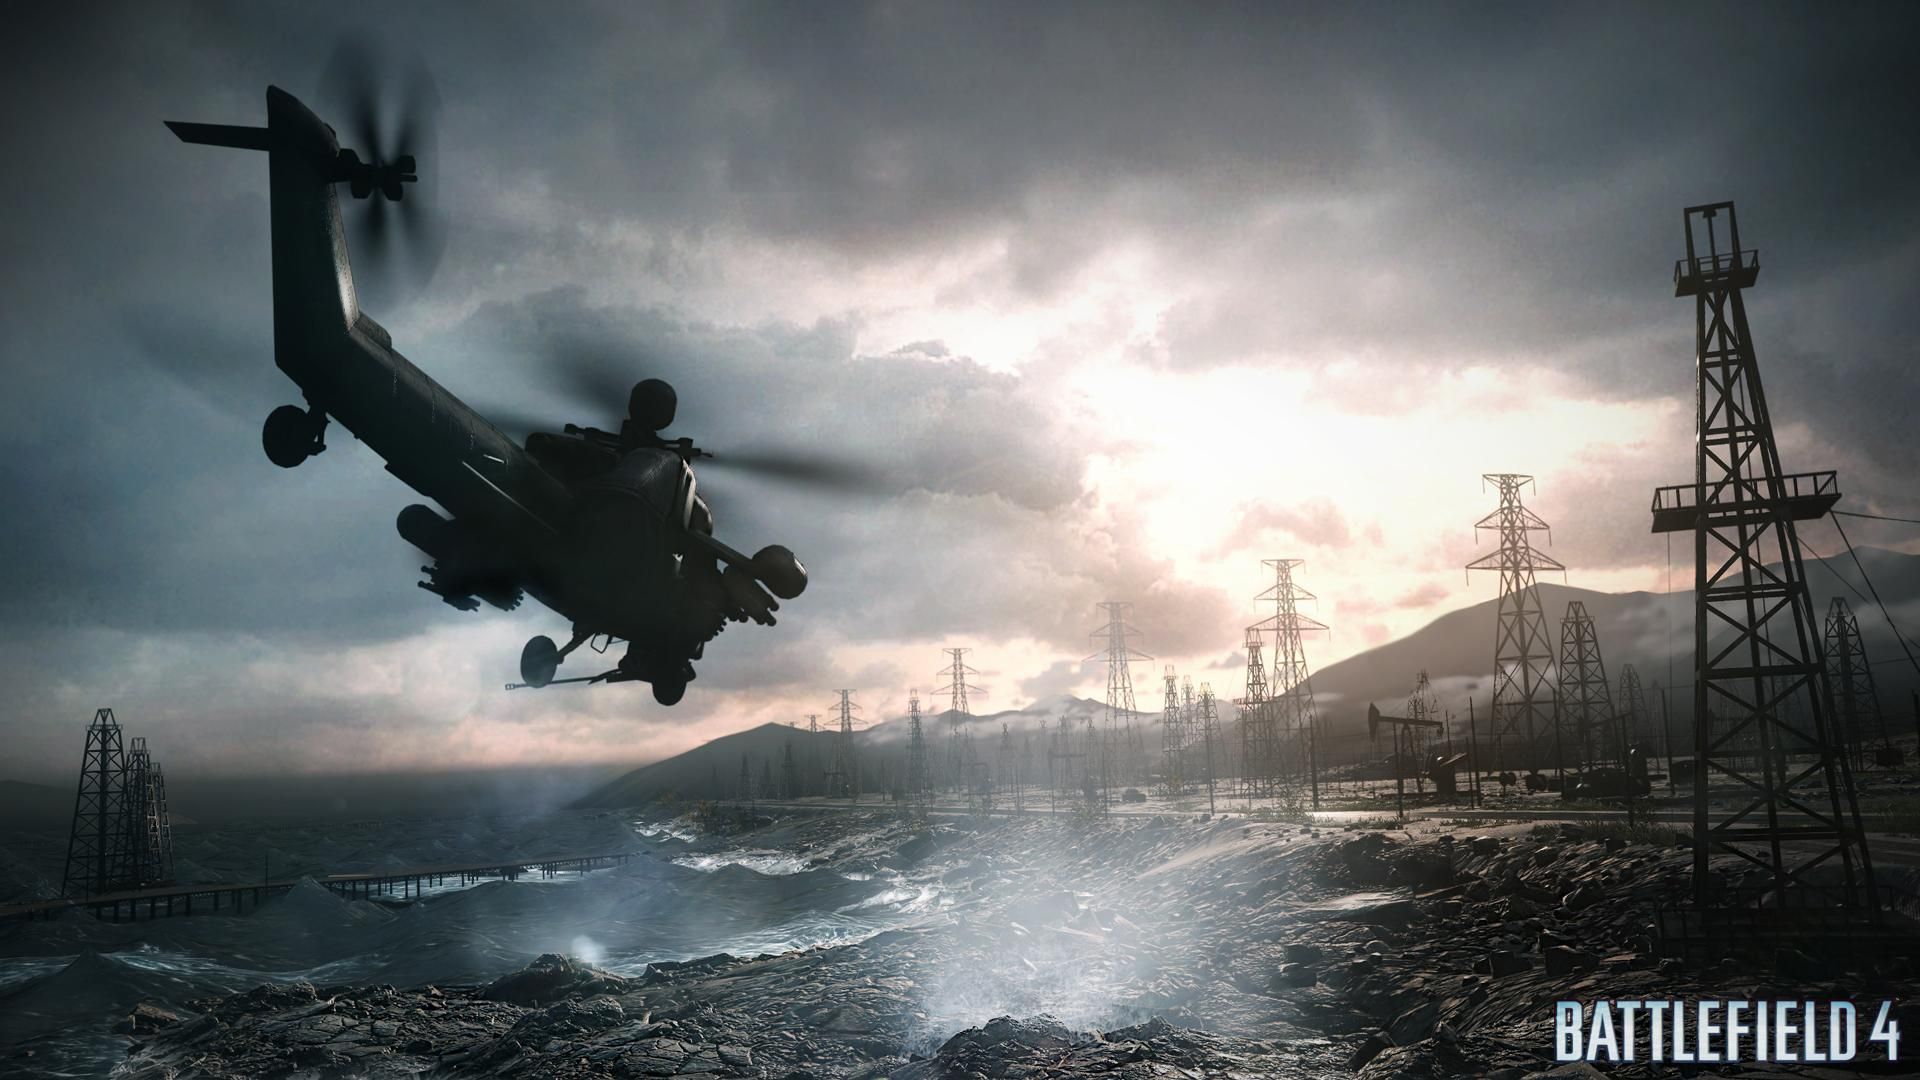 Here are a few Battlefield 4 HD wallpapers for your desktop